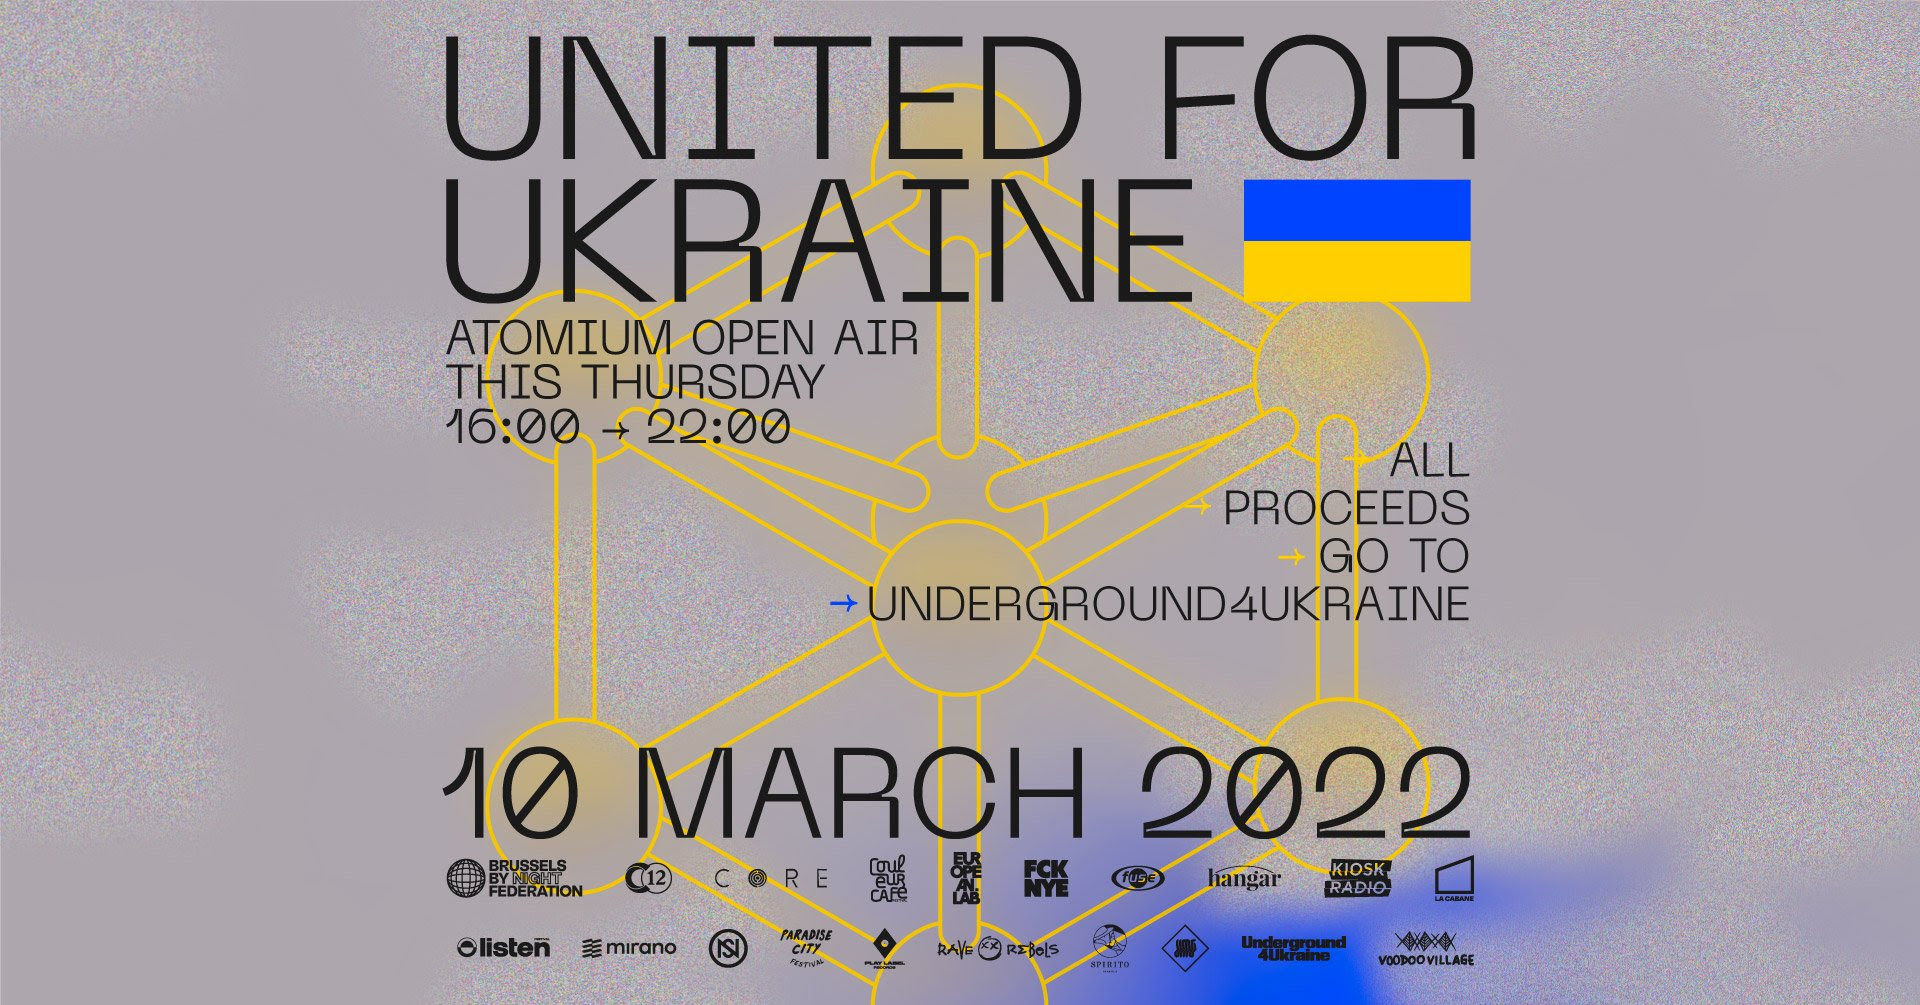 United for Ukraine event on 10 March